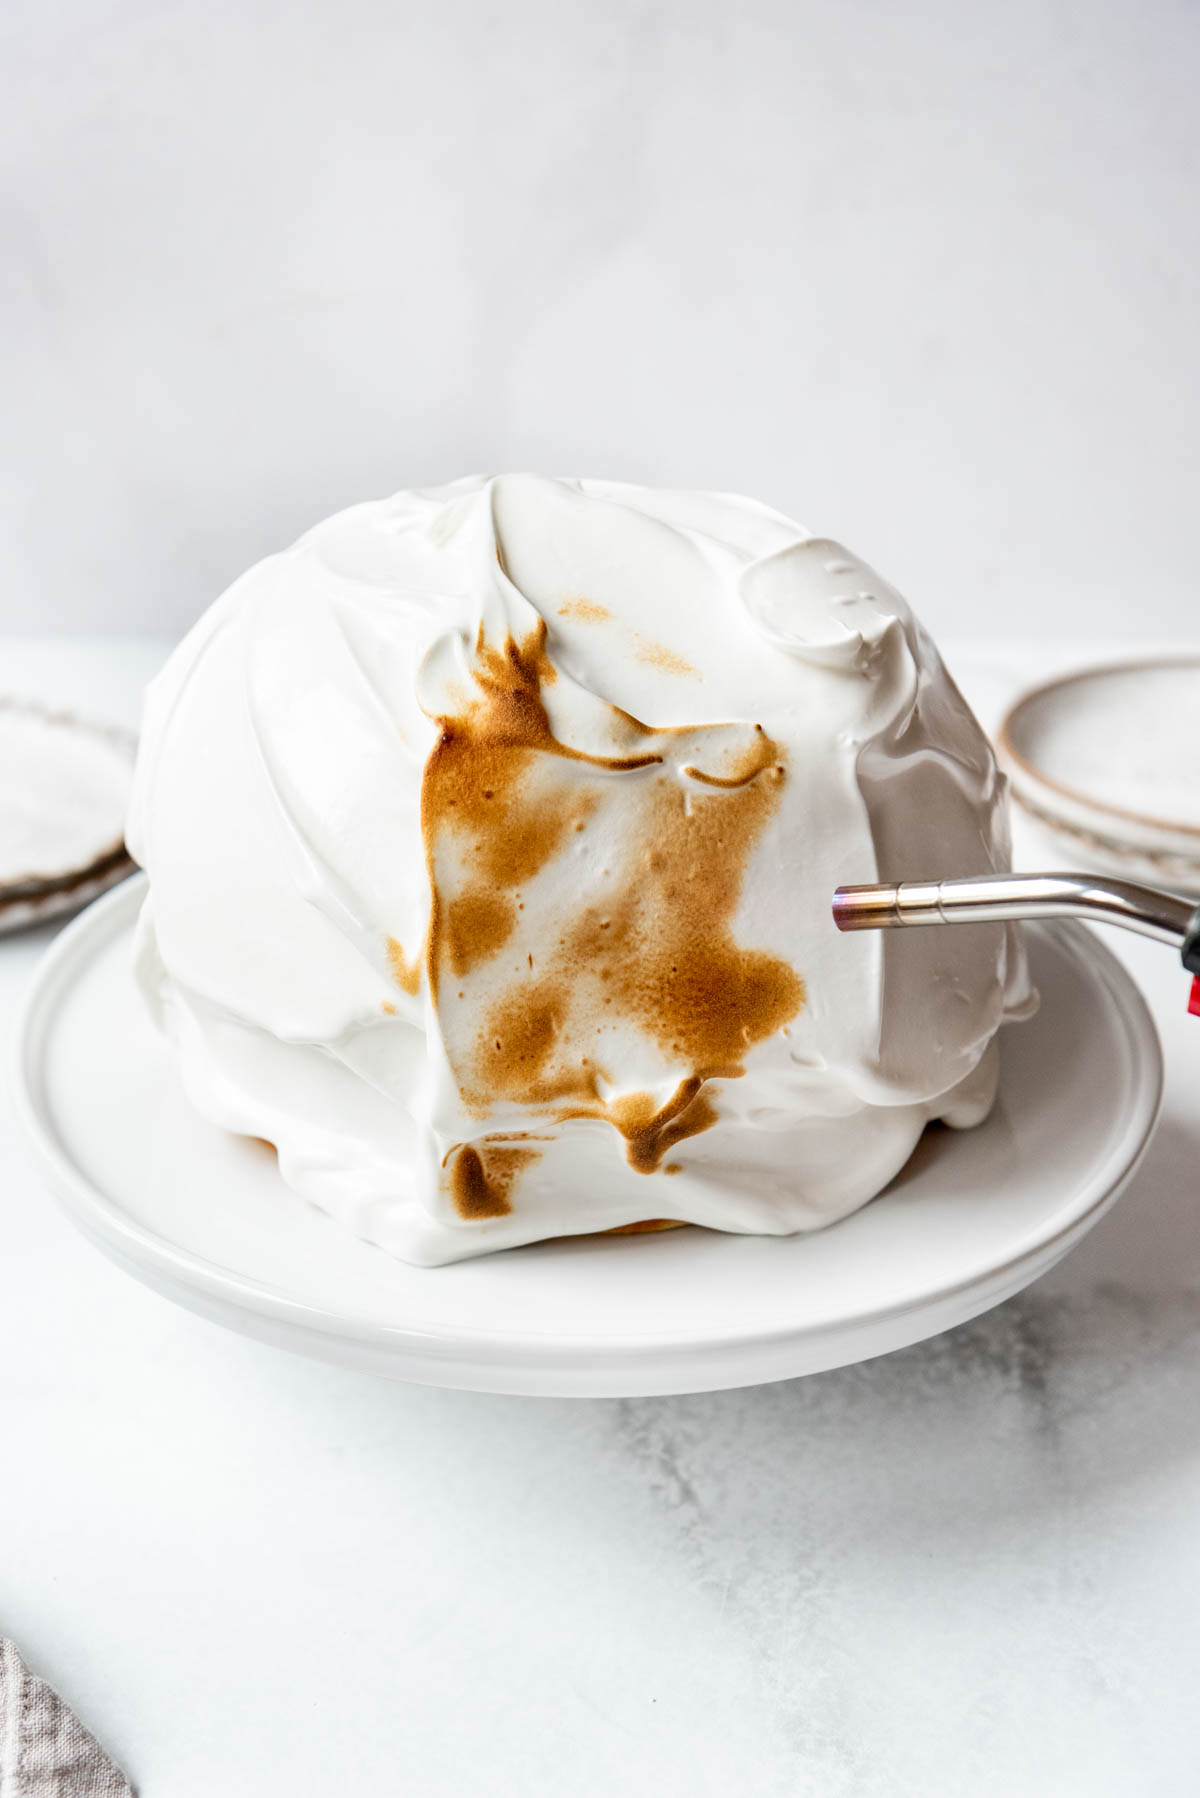 Toasting meringue on a baked Alaska with a kitchen torch.